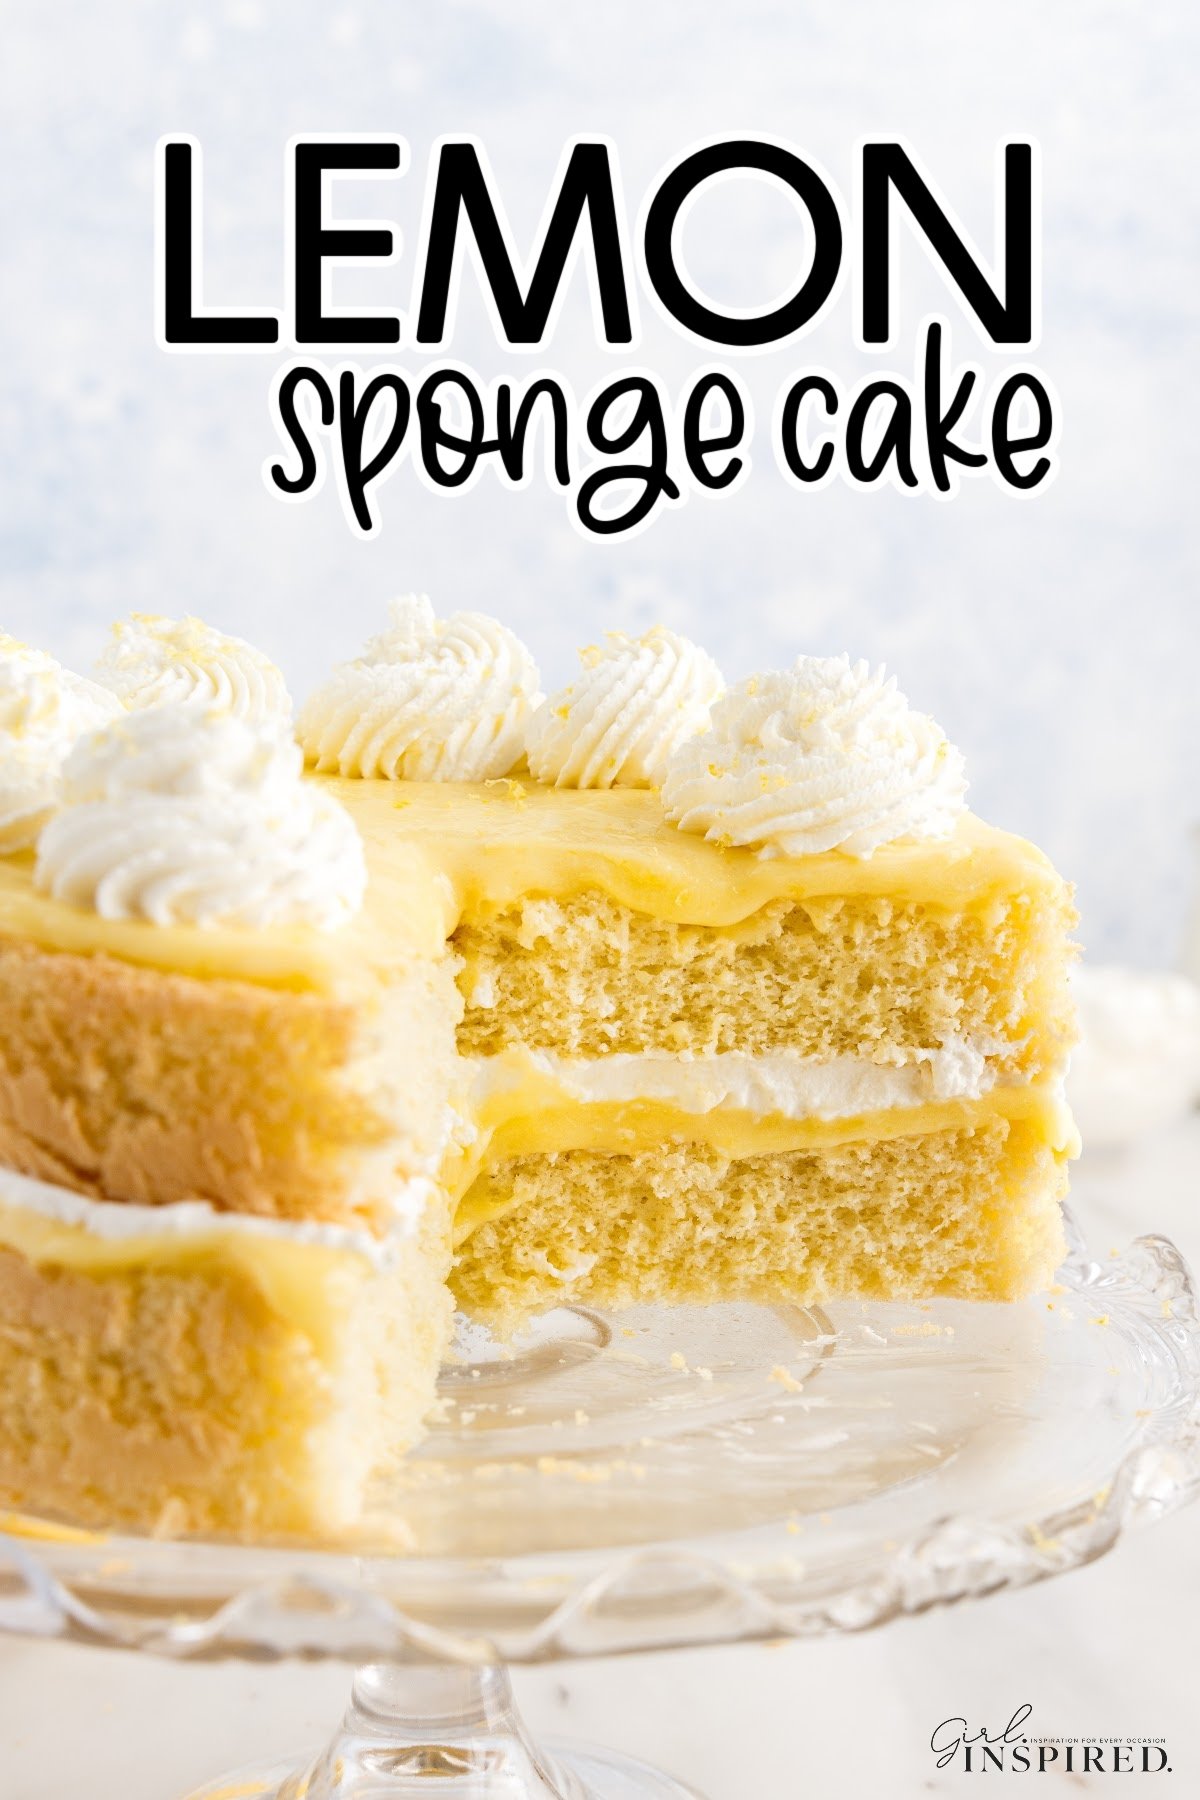 Lemon Sponge Cake with slices missing with text overlay.